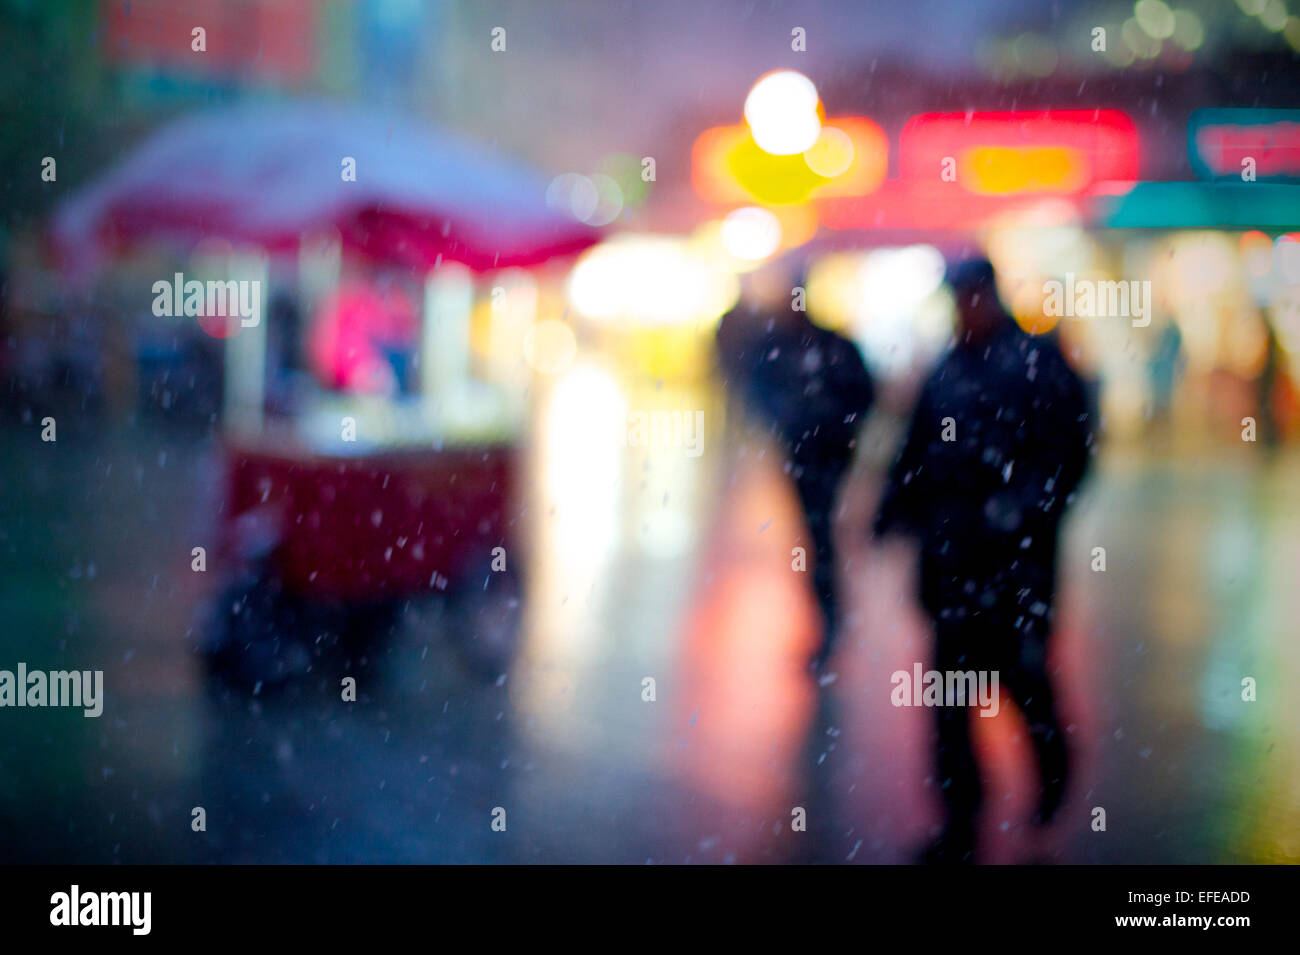 Locals in Taksim square during a snow storm as part of a photo essay on winter breaks in Istanbul, Turkey. Stock Photo